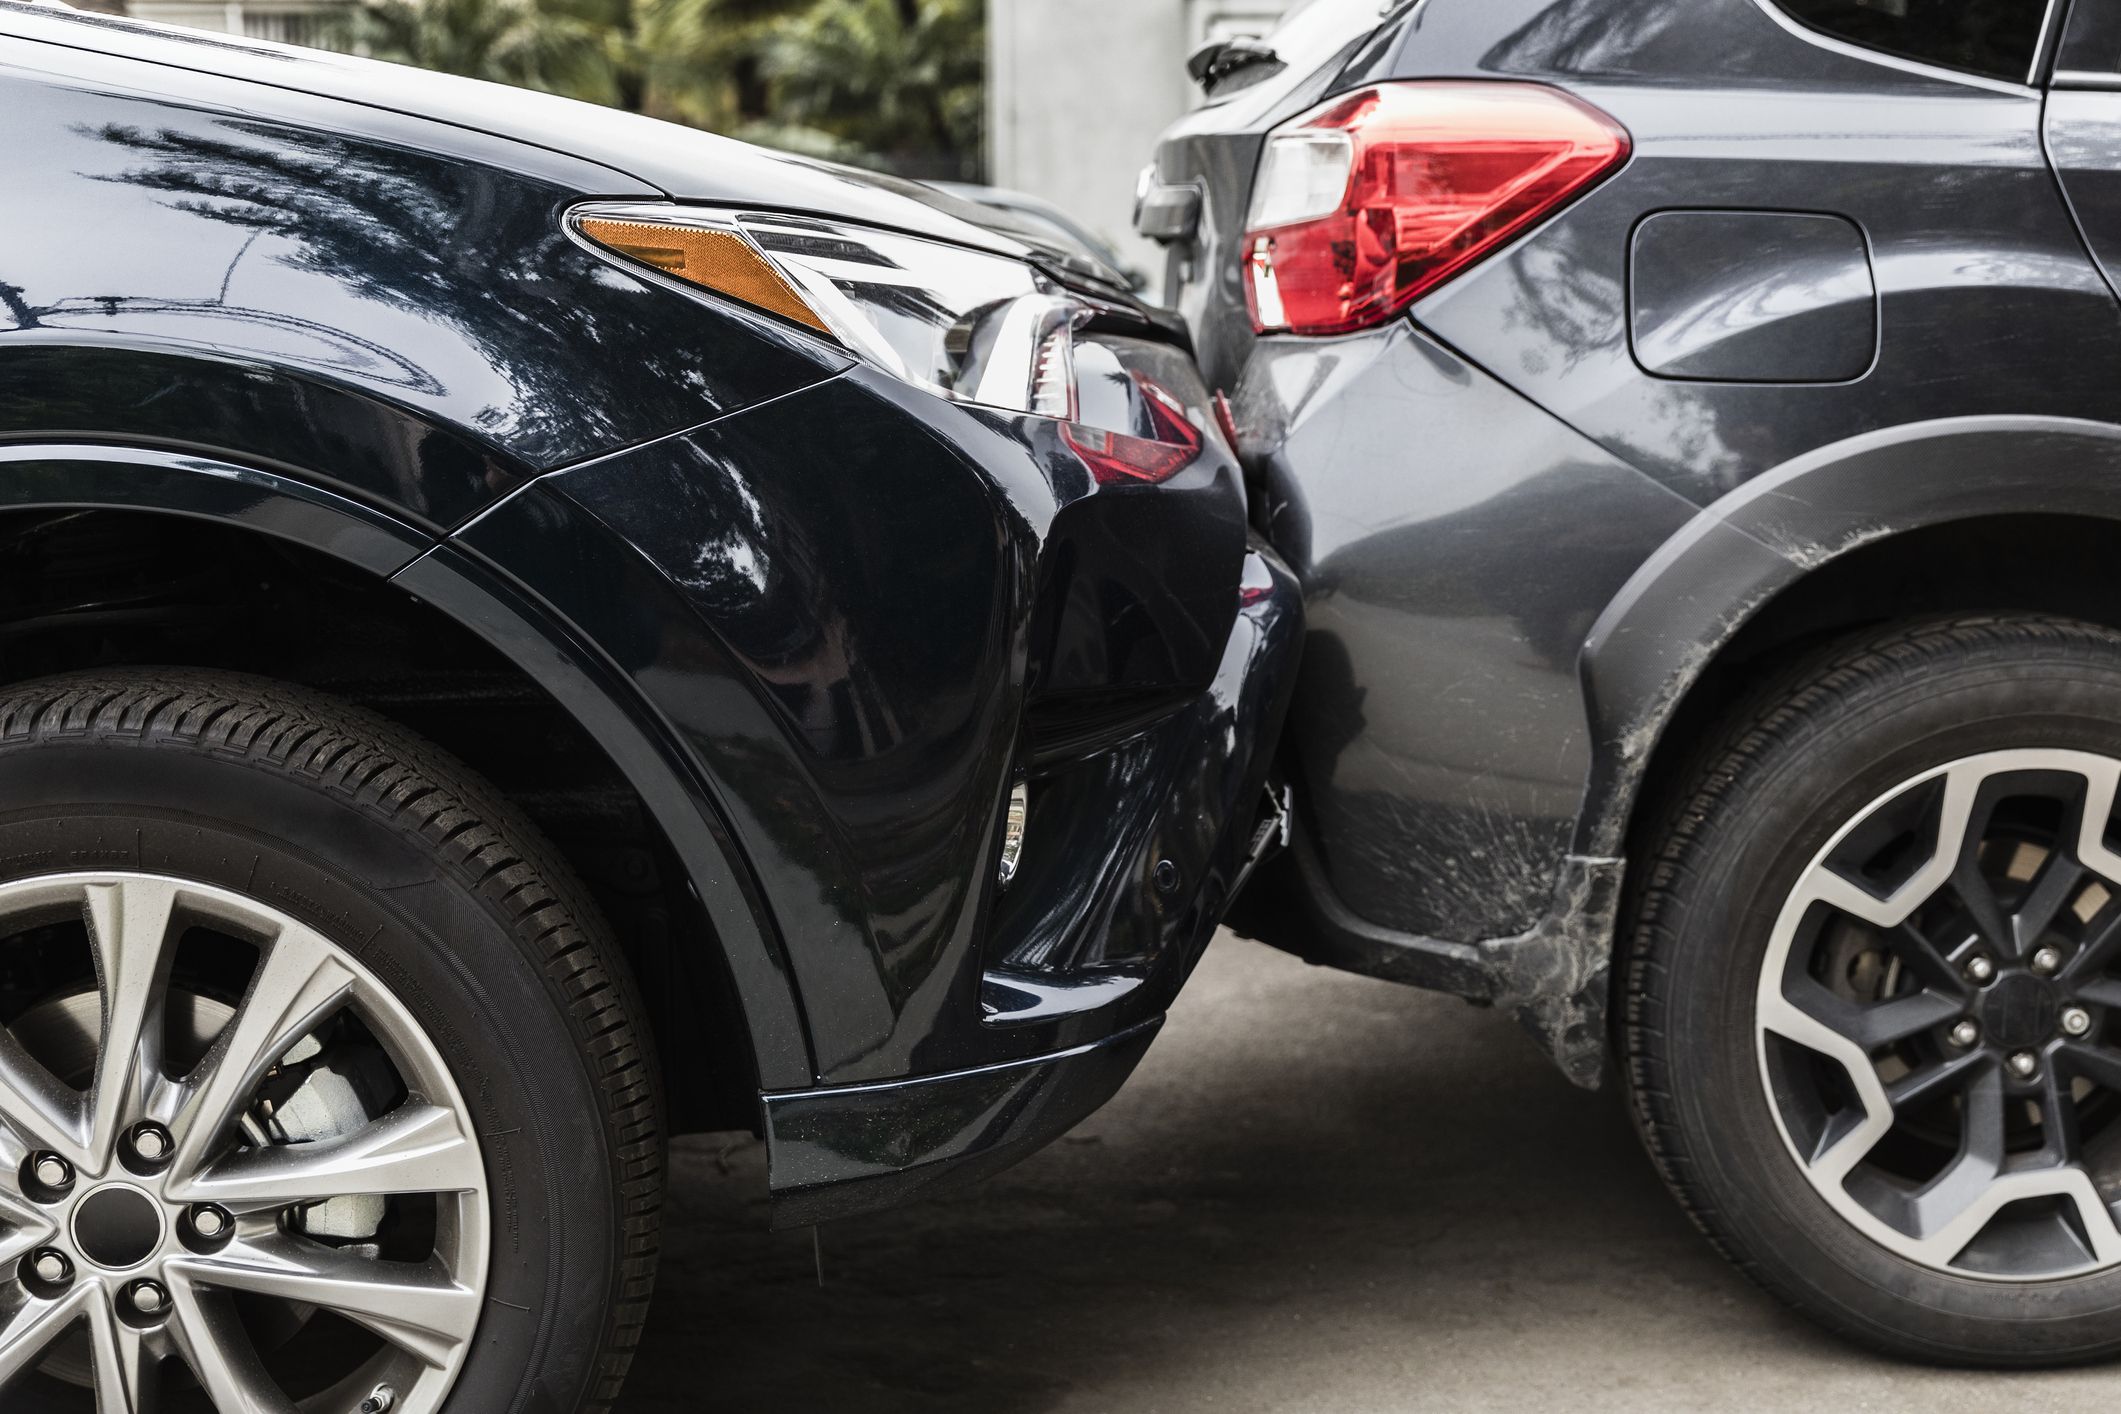 How Does Insurance Work In A Car Accident?